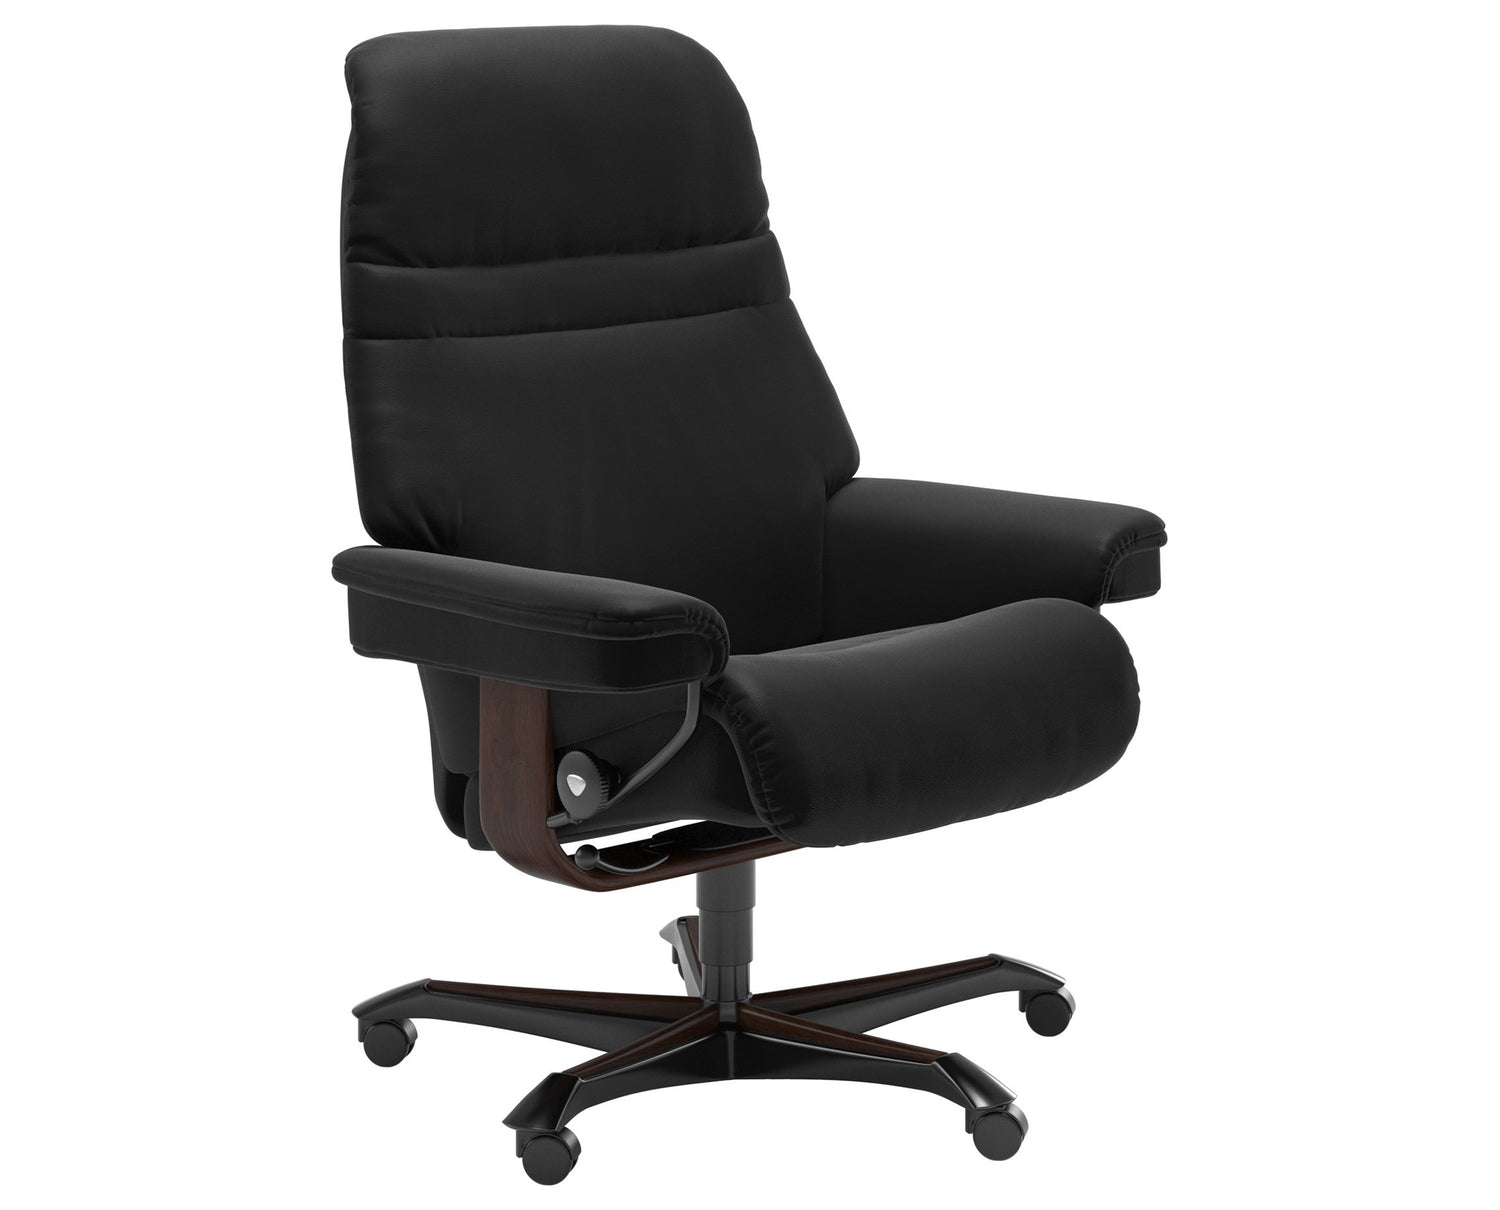 Paloma Leather Black M & Brown Base | Stressless Sunrise Home Office Chair | Valley Ridge Furniture